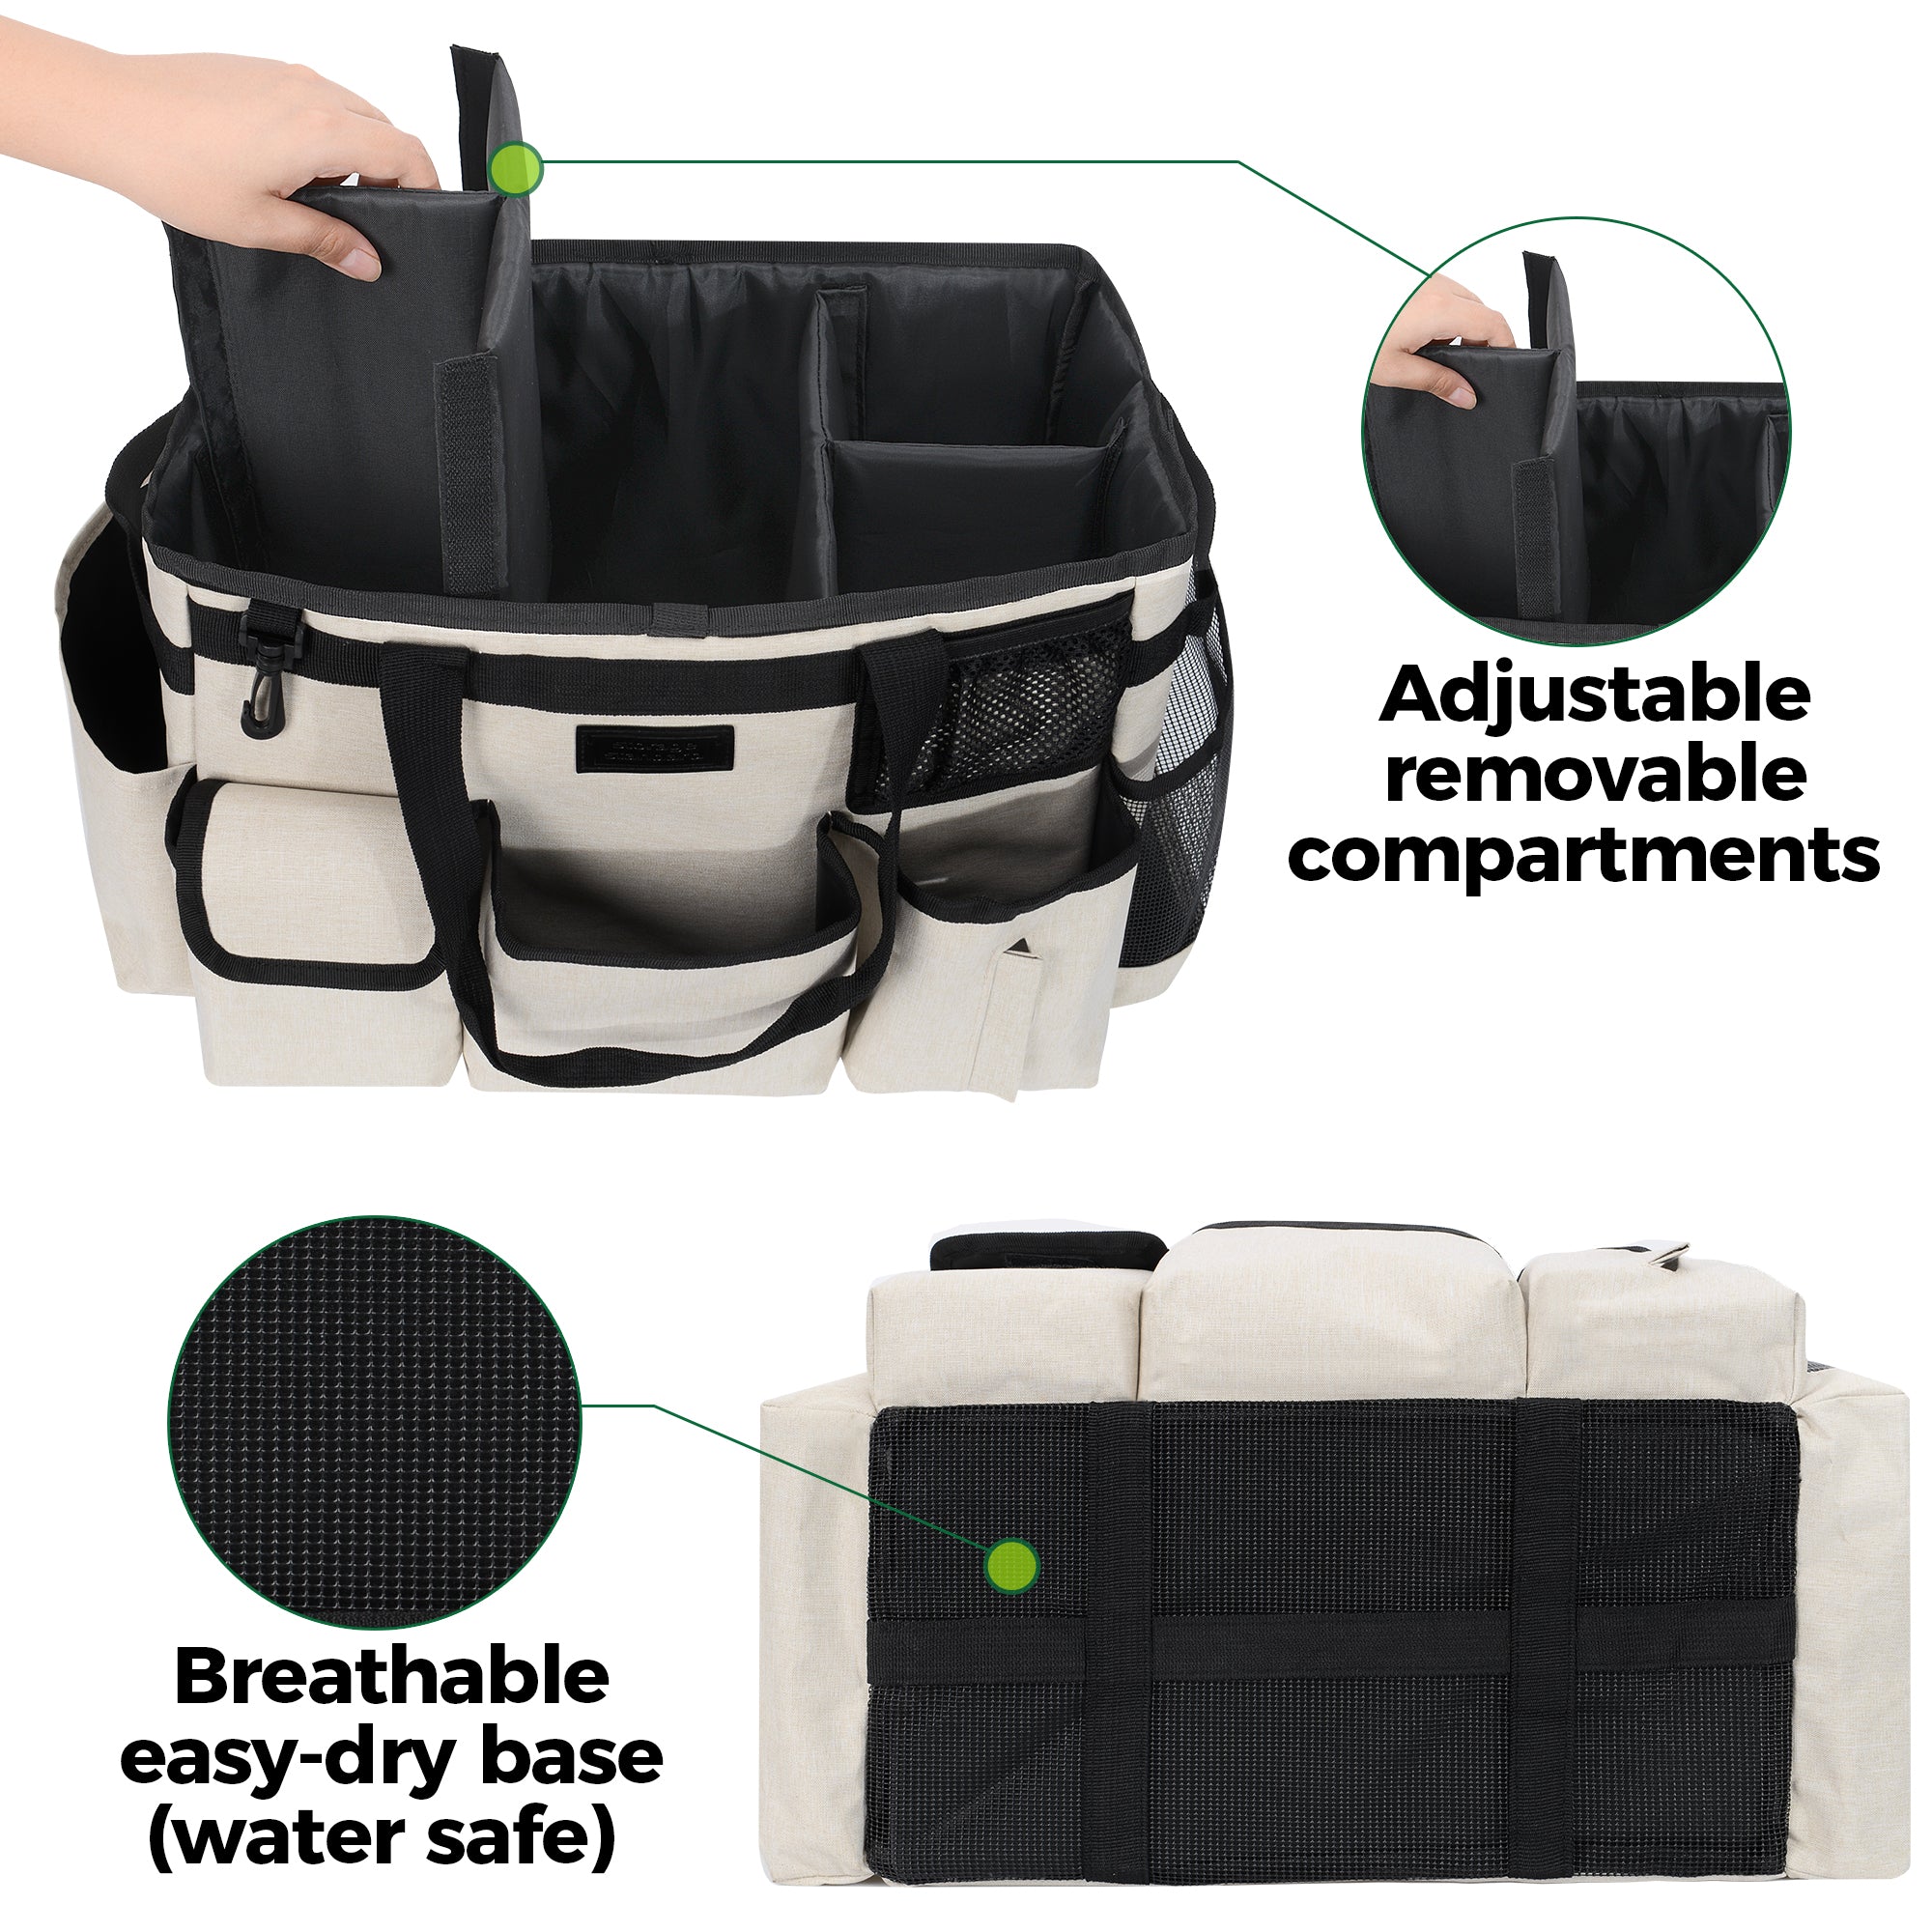 FifthStart Wearable Cleaning Caddy with Handle Caddy Organizer for Cleaning  Supplies with Shoulder and Waist Straps, Car Organizer, Under Sink